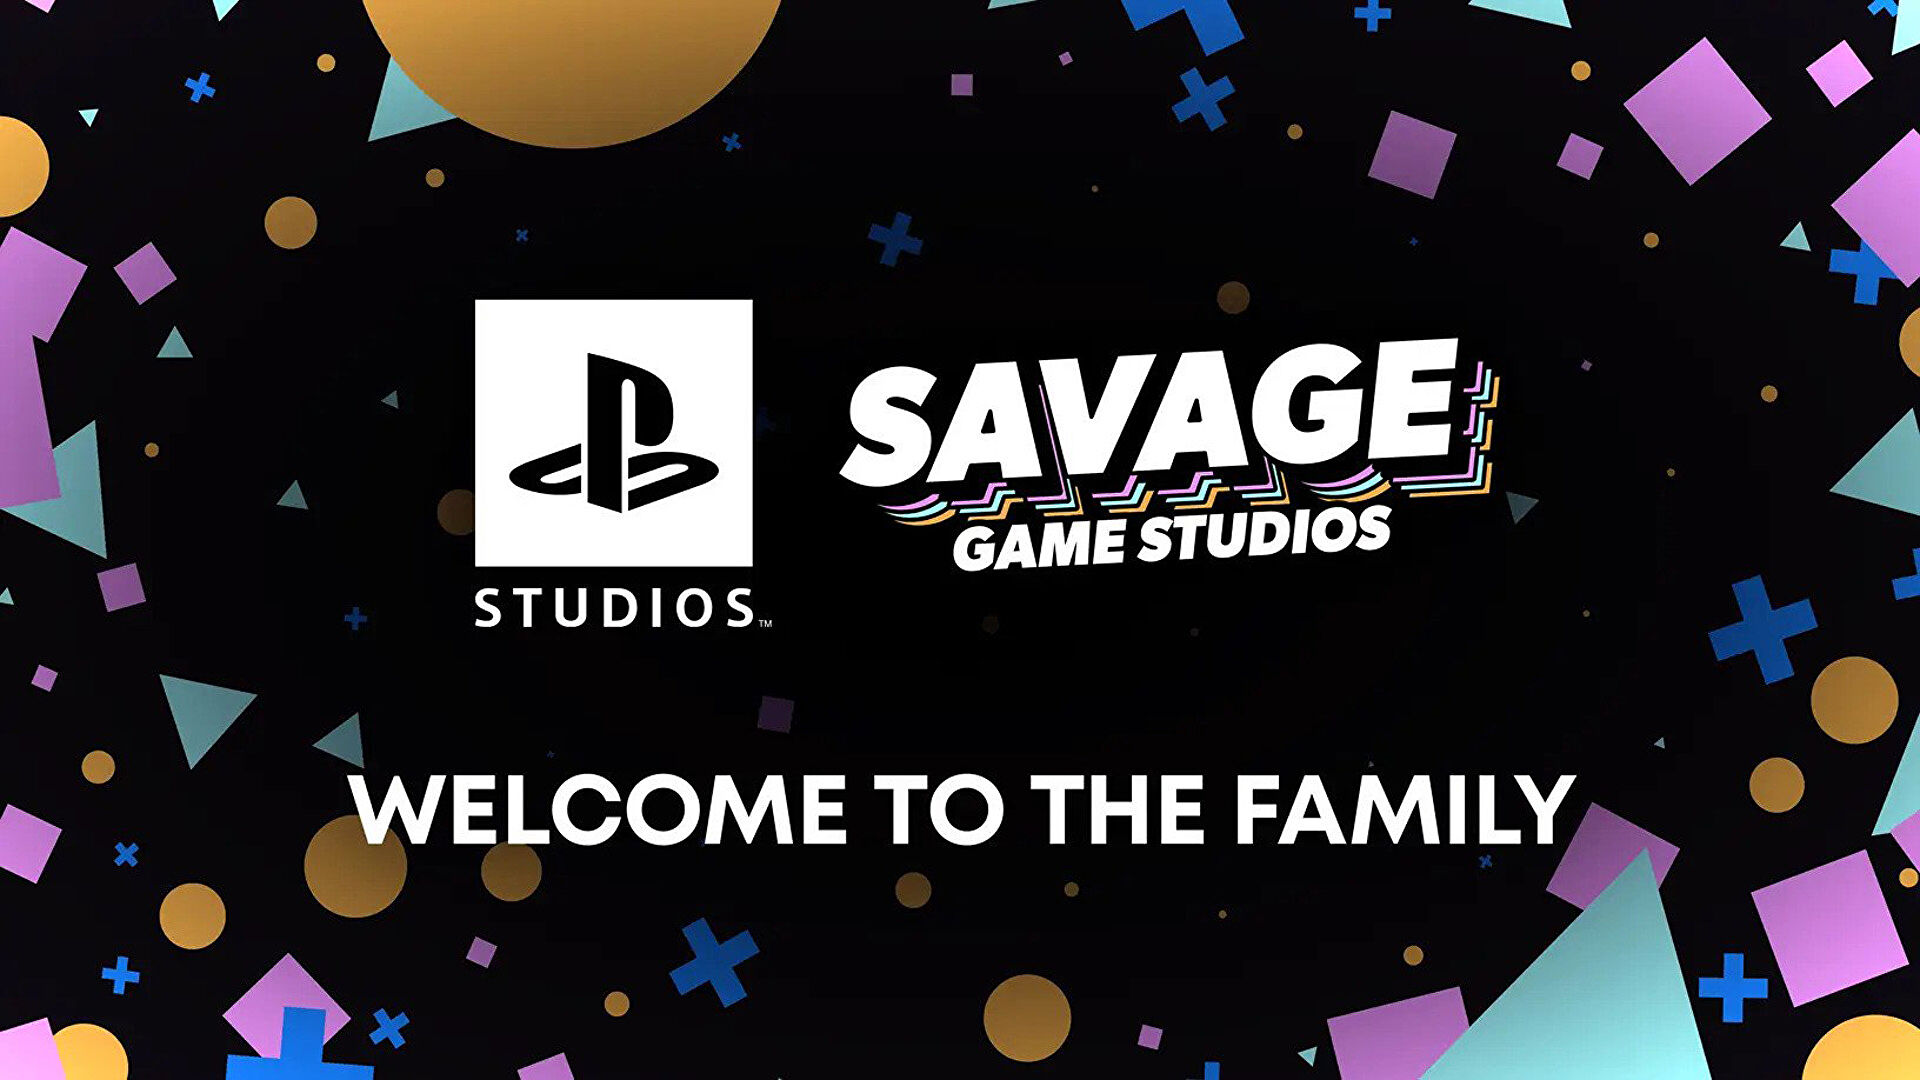 PlayStation now has a mobile division, as it acquires Savage Game Studios